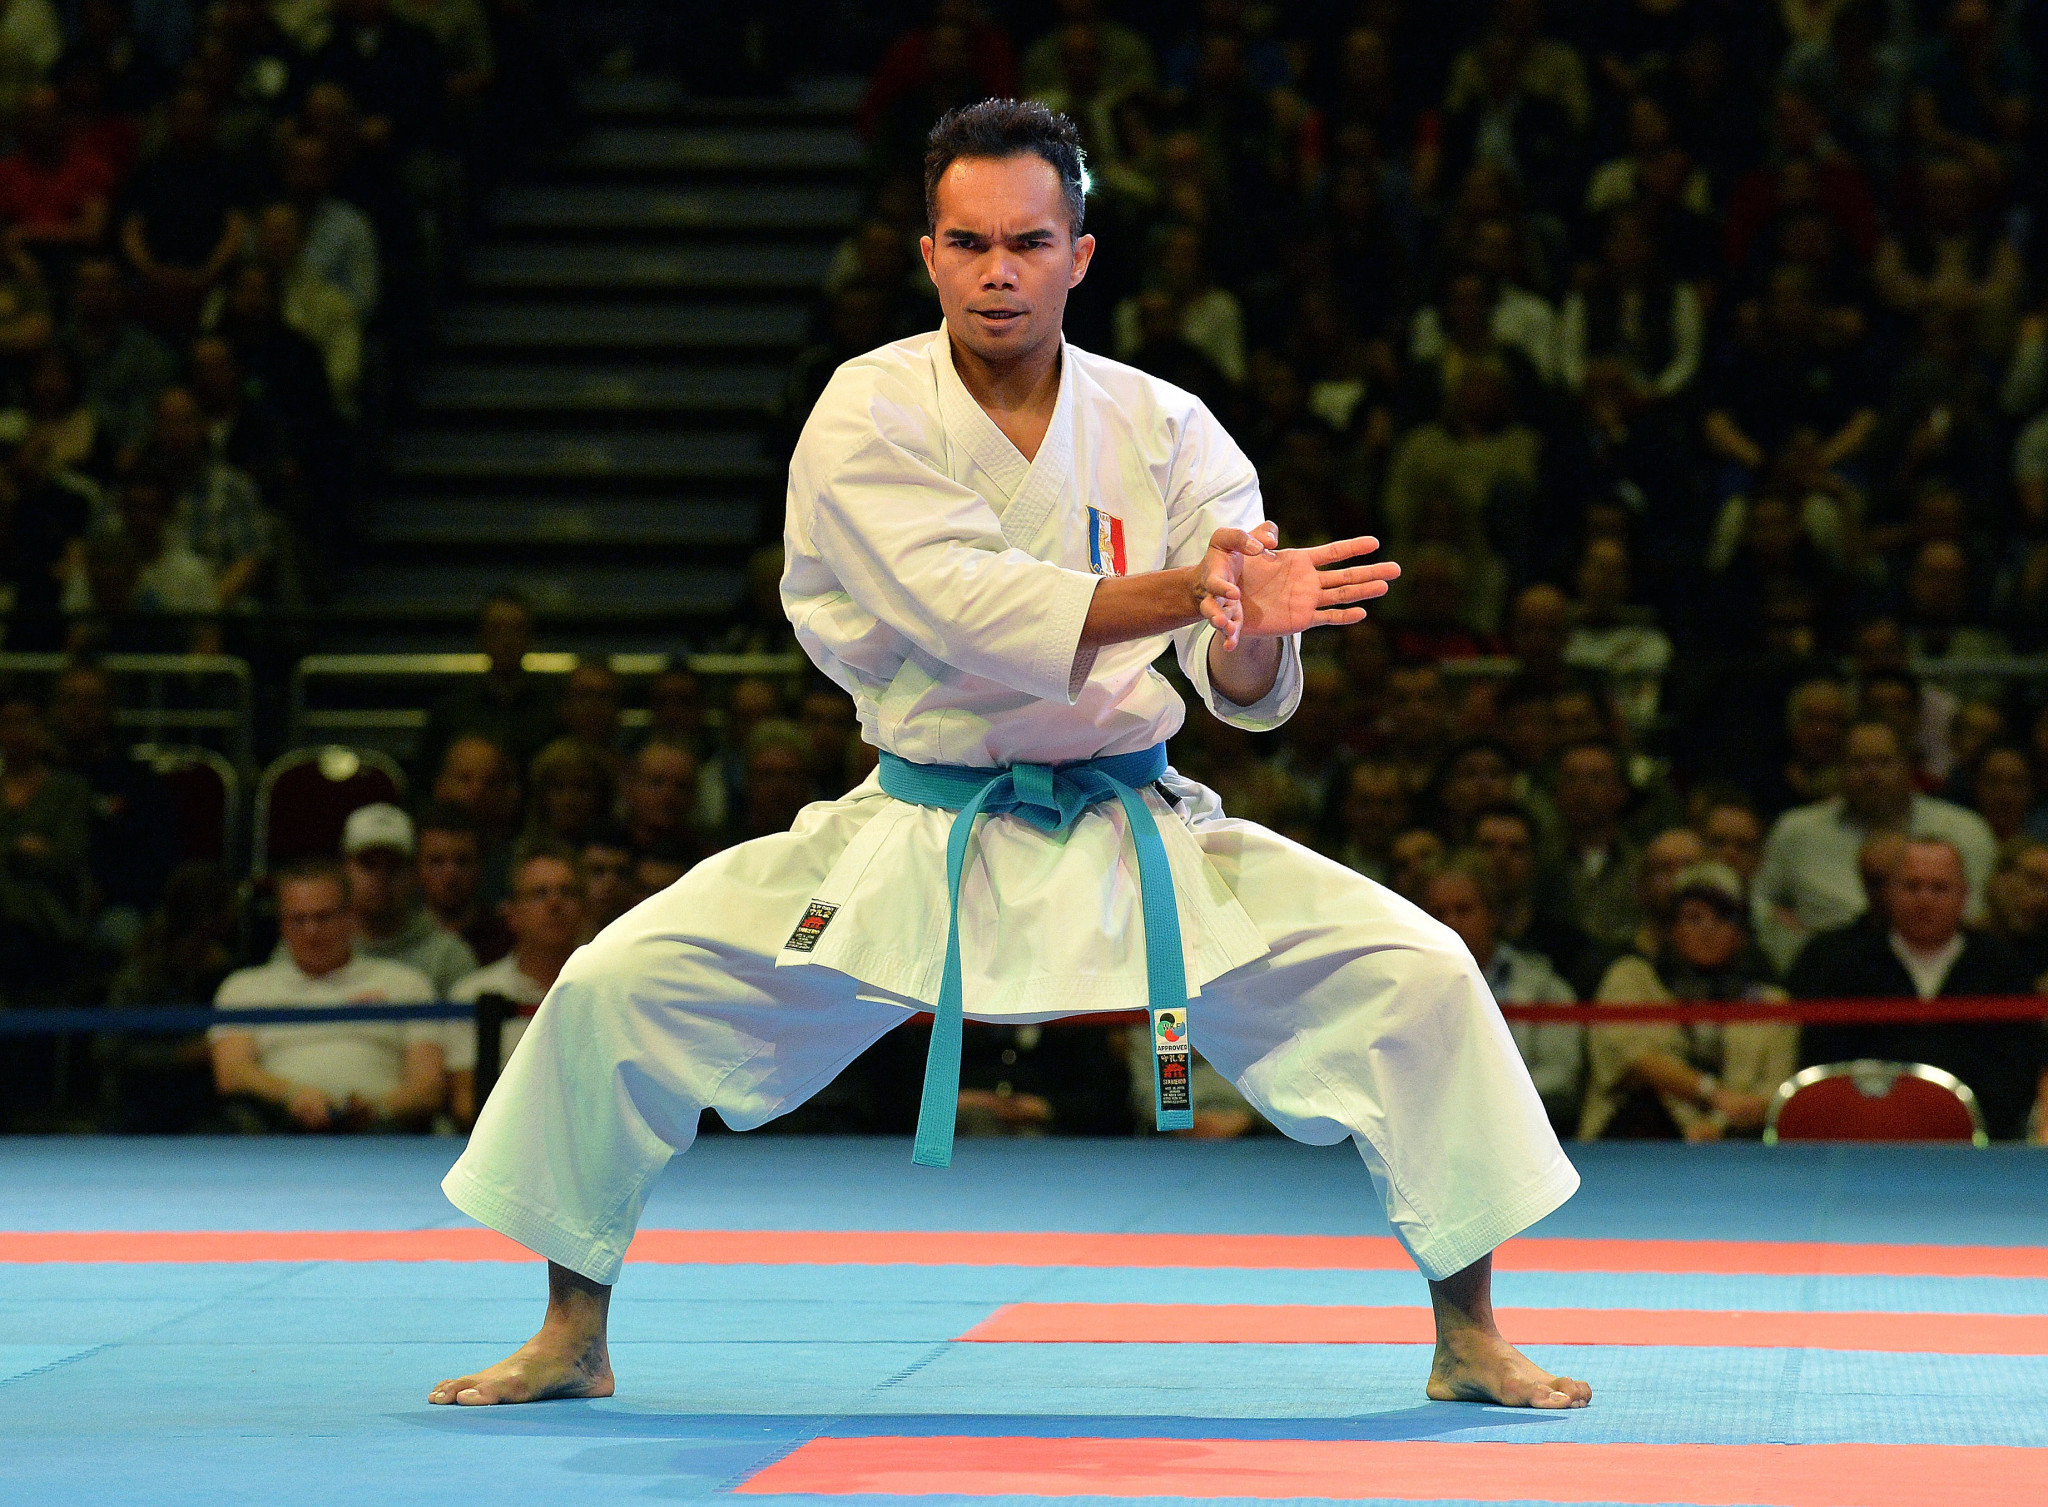 Dack clinches gold at Oceania Karate Federation Championships in Sydney